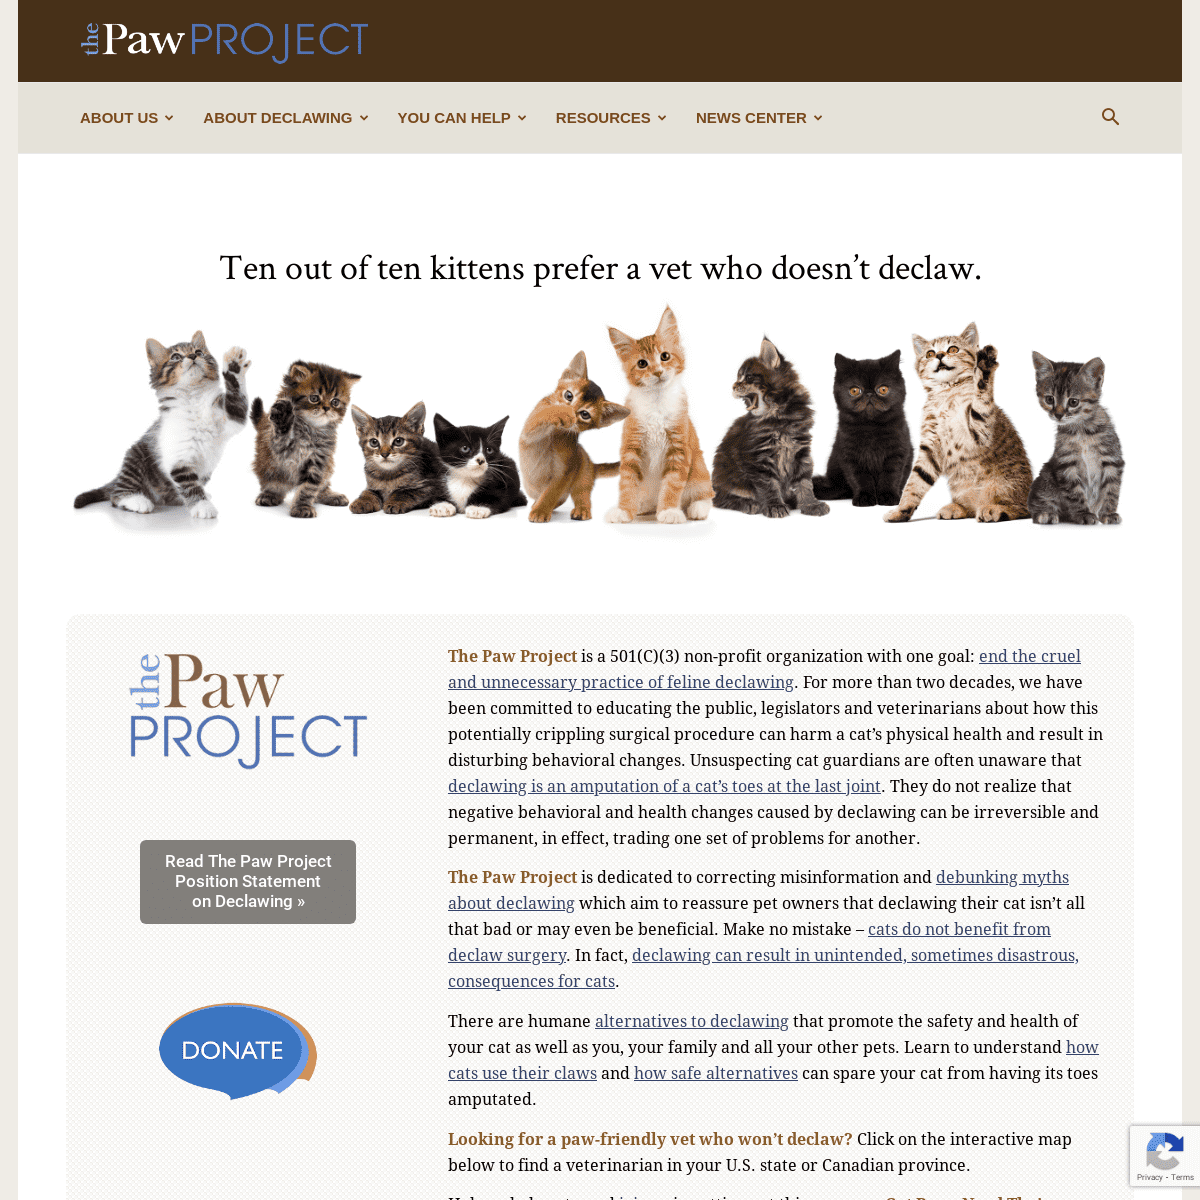 A complete backup of https://pawproject.org